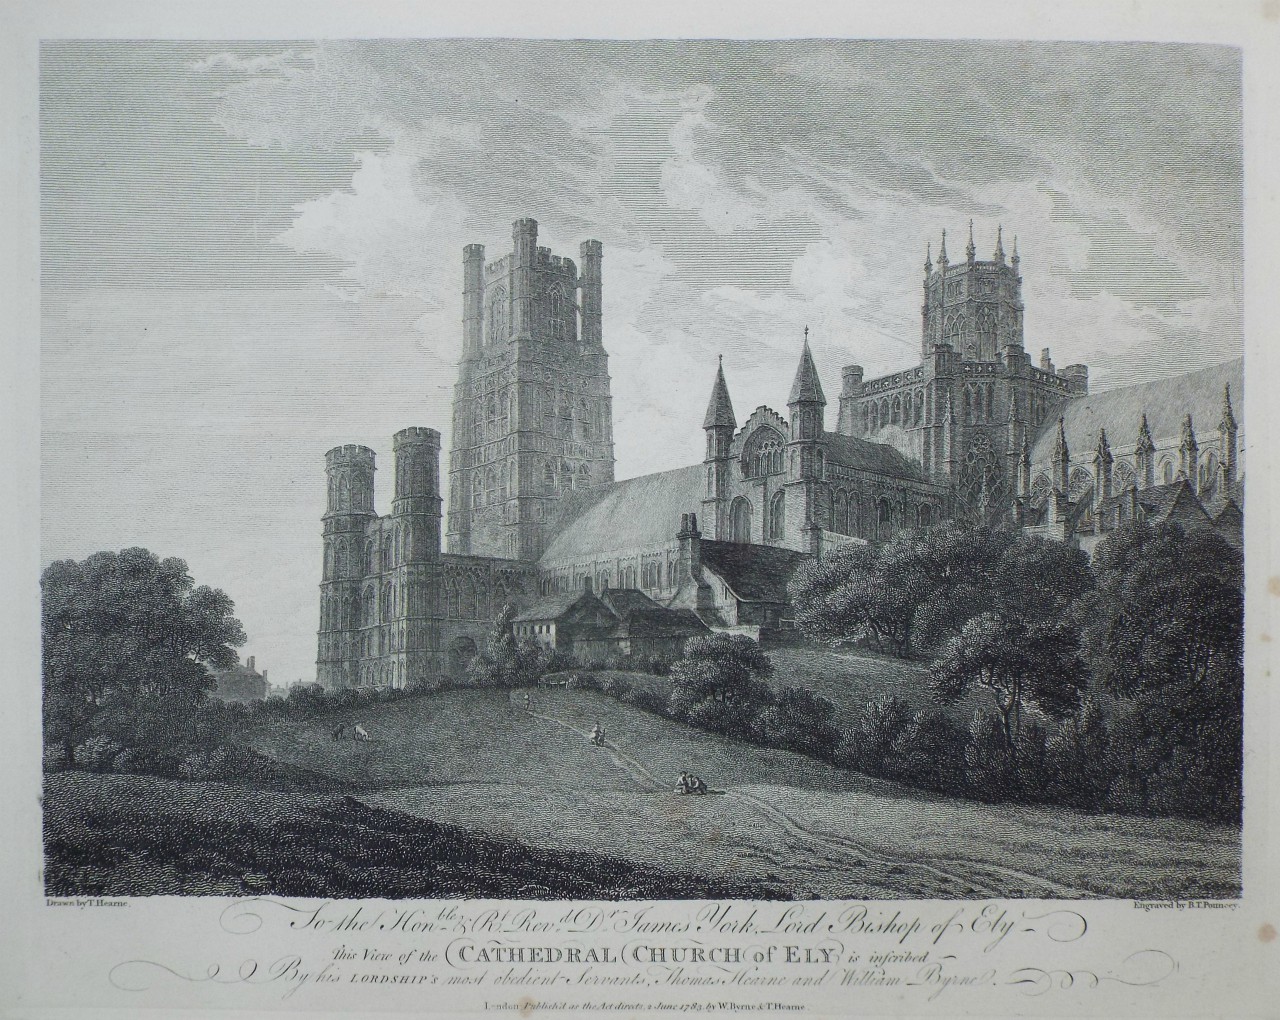 Print - Cathedral Church of Ely - Byrne